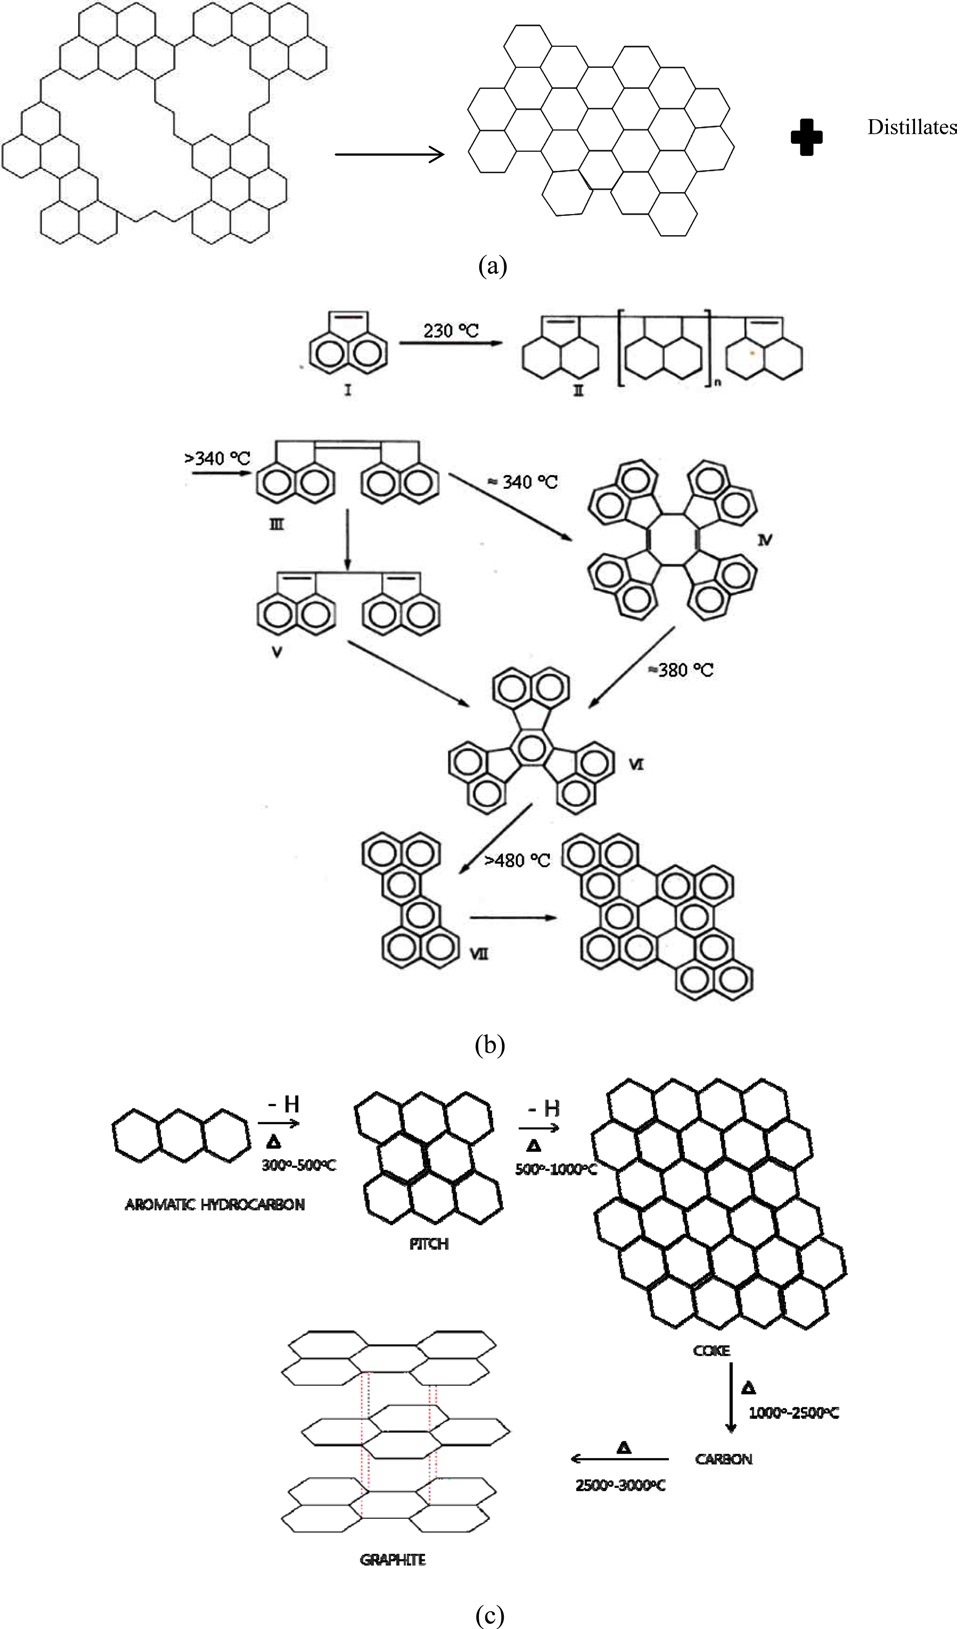 Sketches of coke formation from various aromatic compounds [11-13]